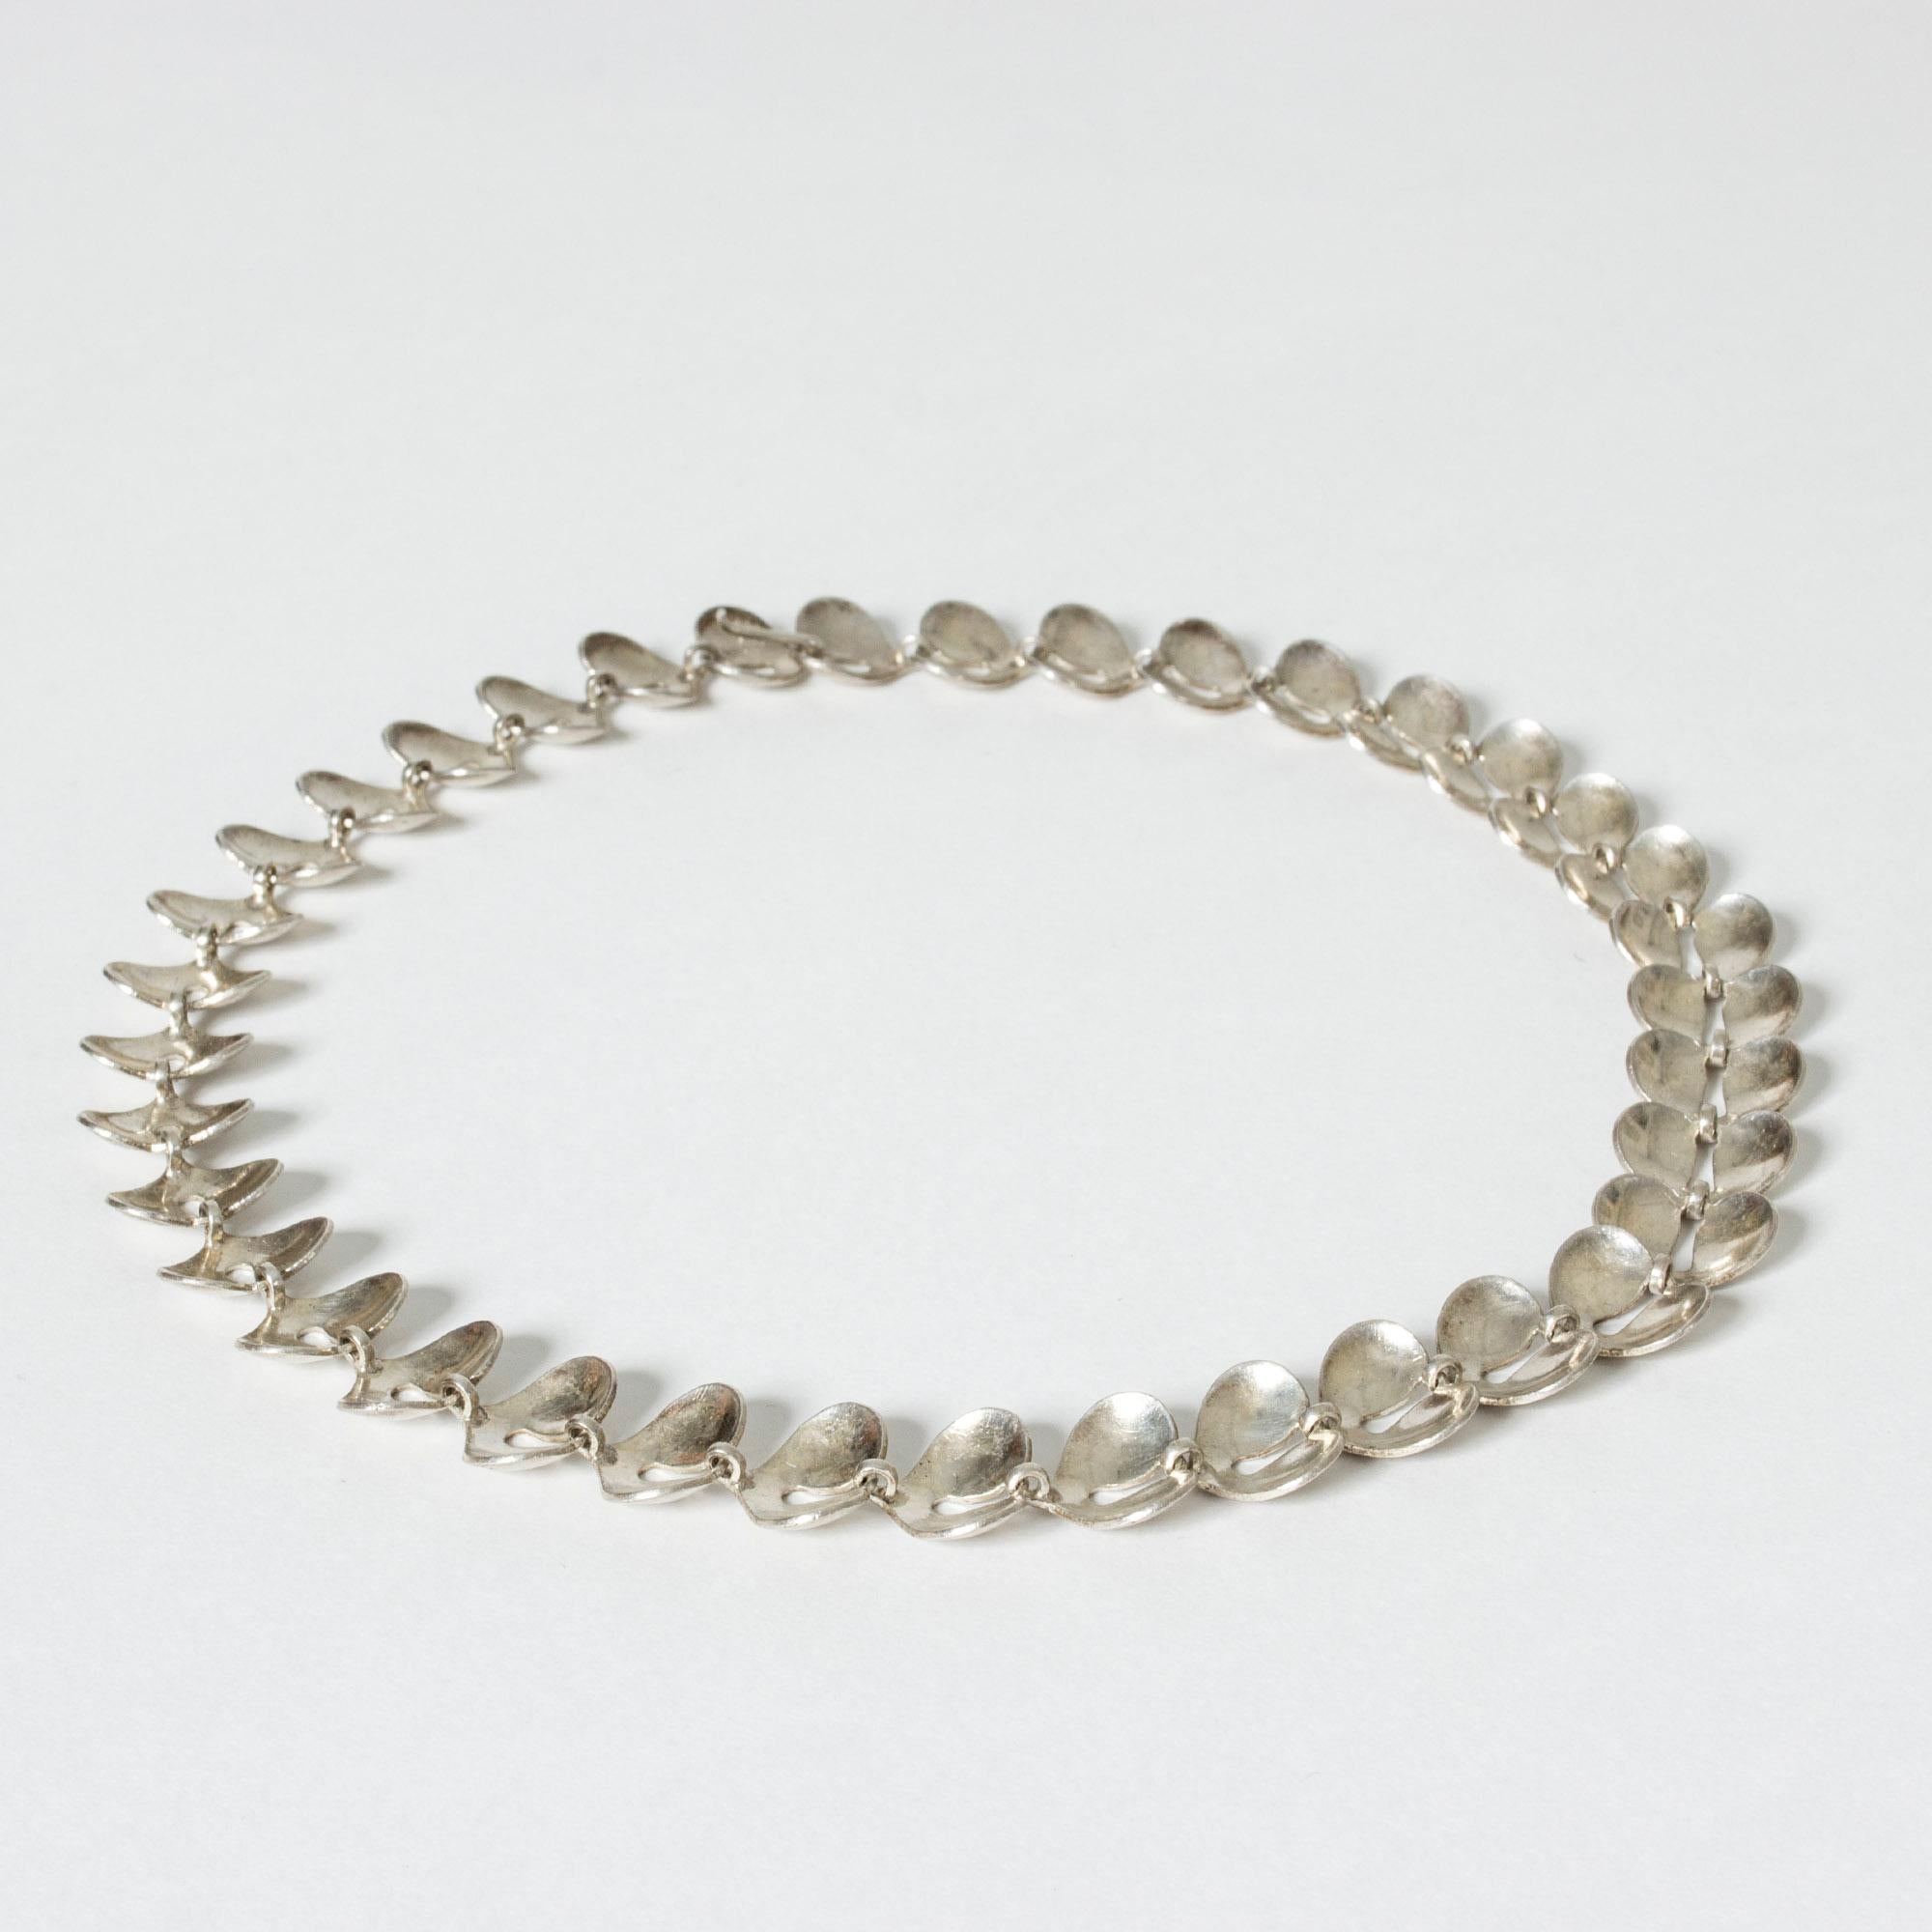 Exquisite silver collier from Stigbert, in heavy silver quality. Made from concave, flower petal like segments that lies nicely around the neck.
